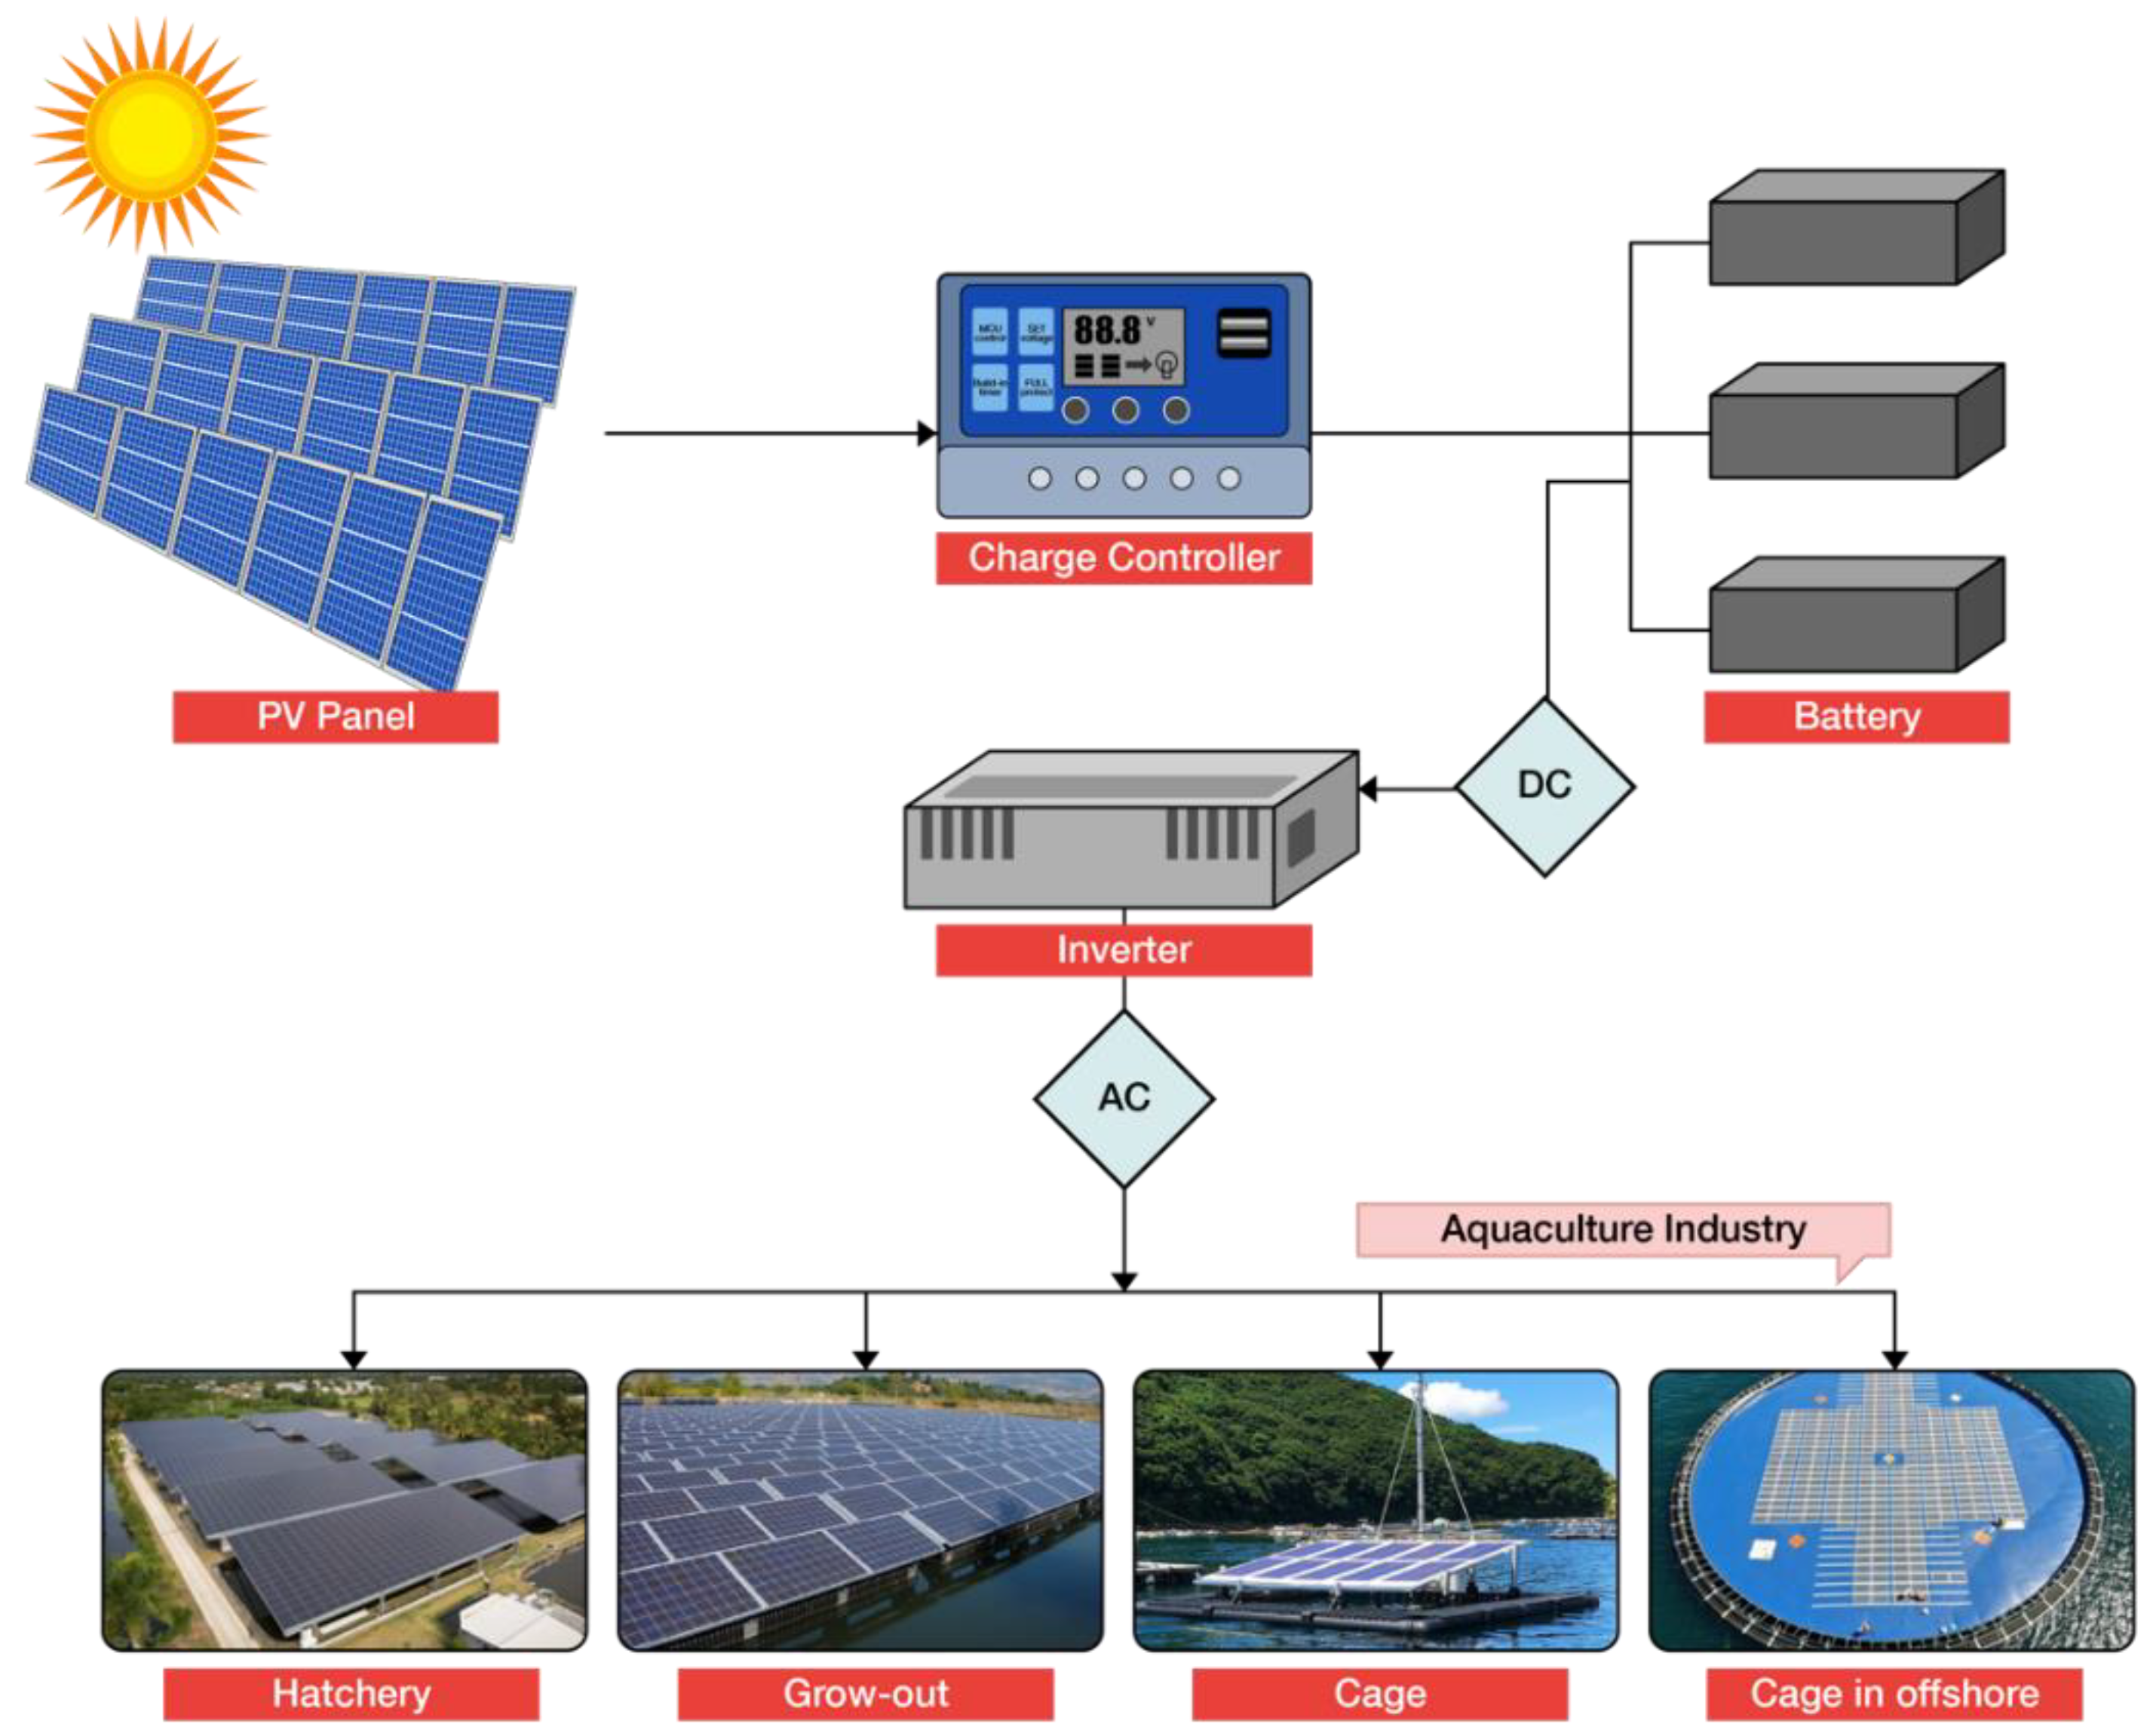 How to Design and Install a Solar PV System - Solved Example